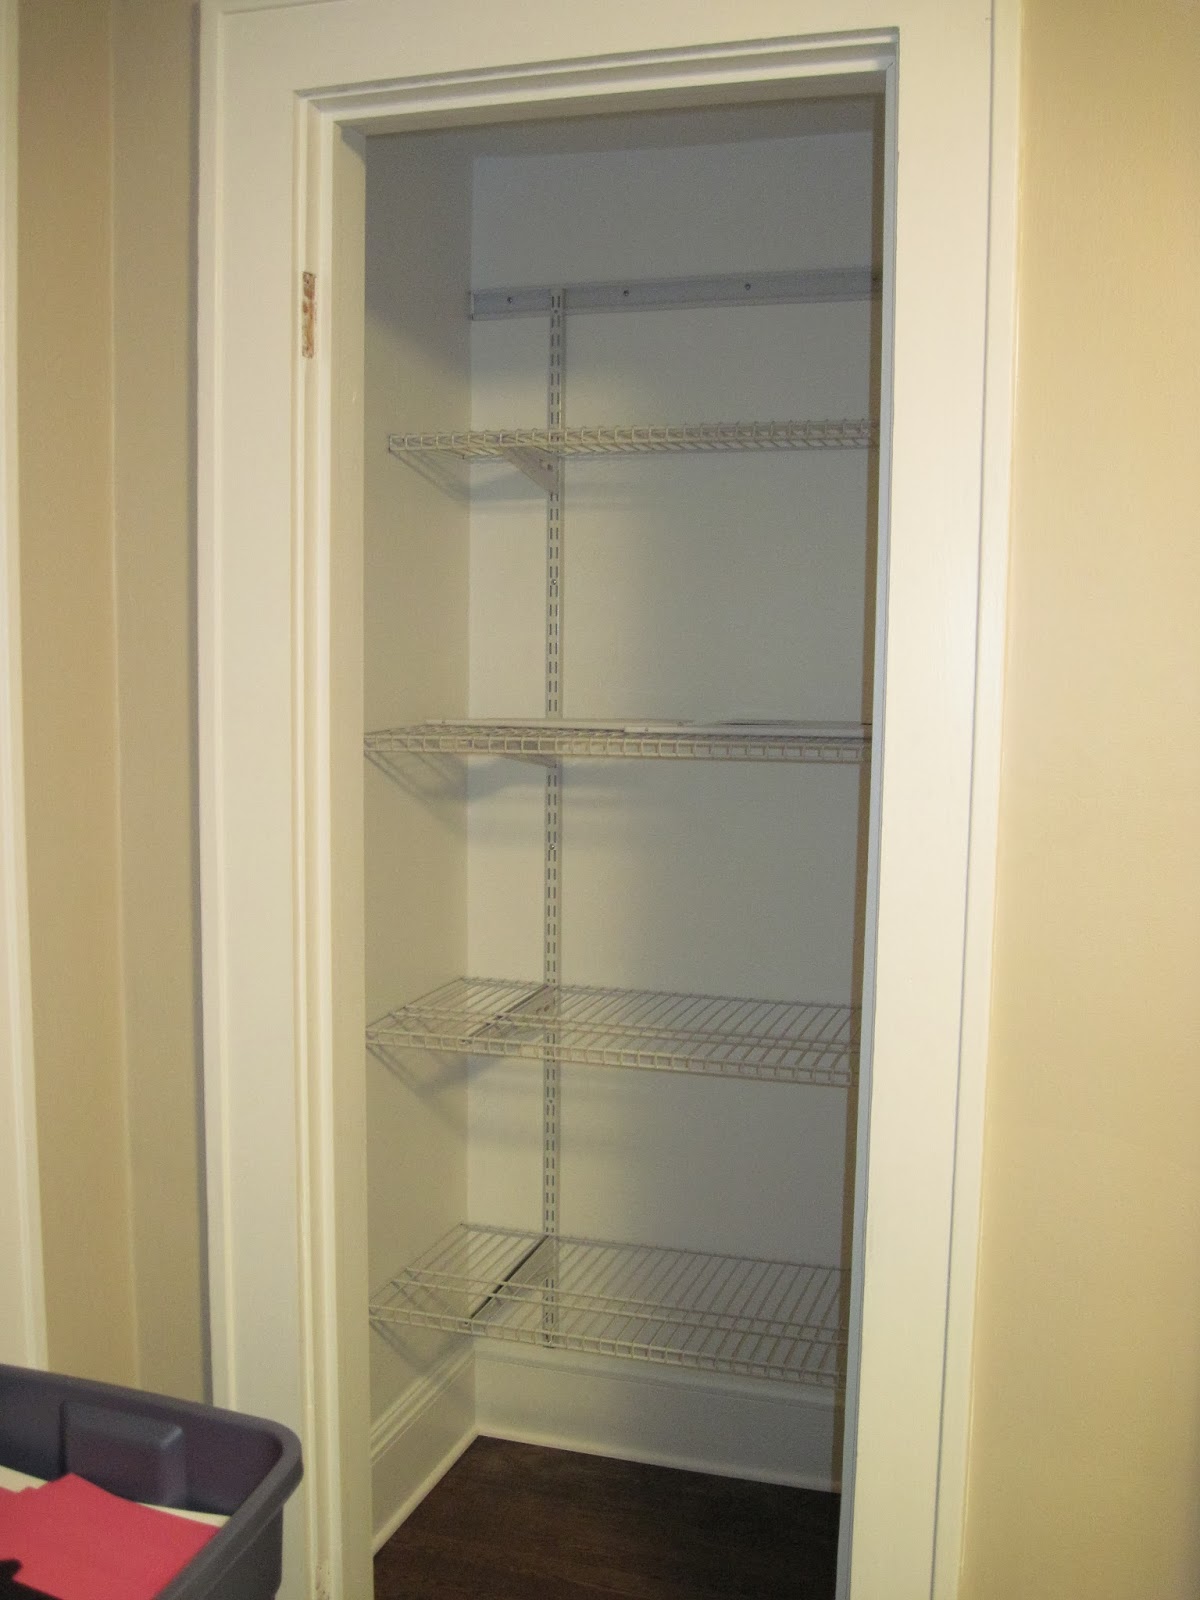 The shelves can be moved to accommodate different heights or taken out 